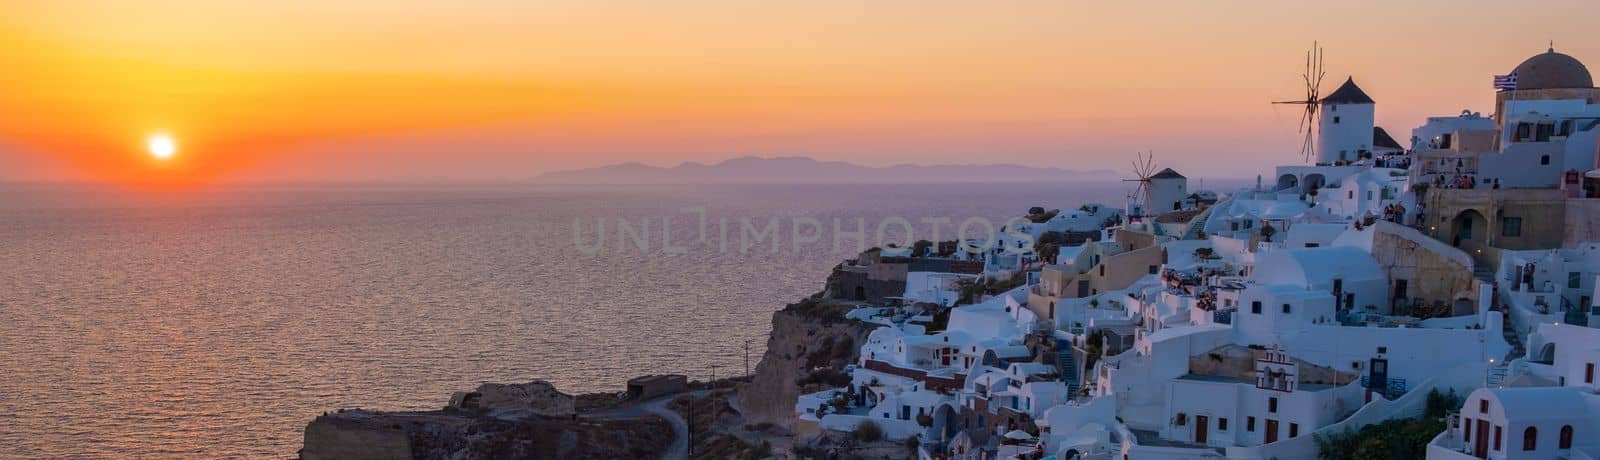 Sunset with white churches an blue domes by the ocean of Oia Santorini Greece by fokkebok